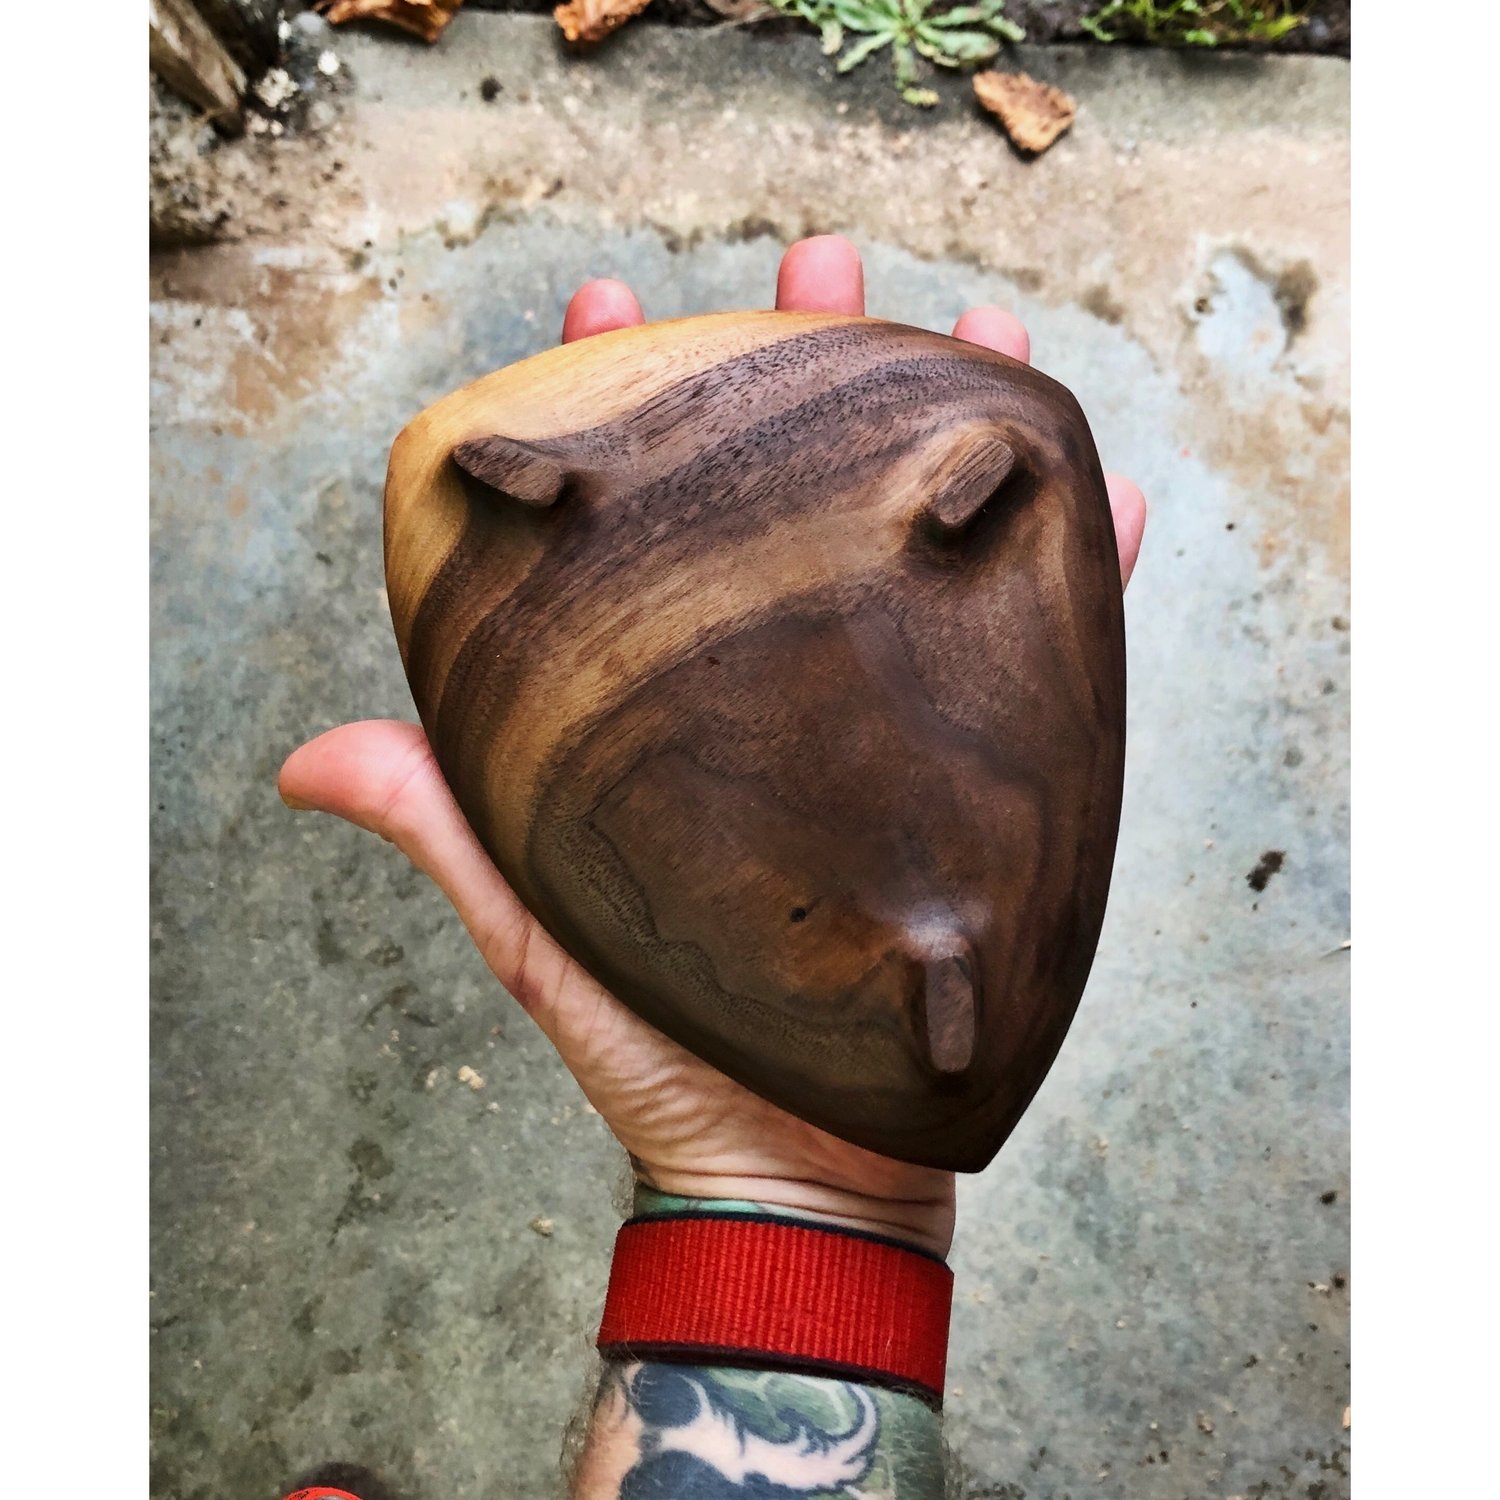 Image of Walnut Shallow Bowl with wee legs 